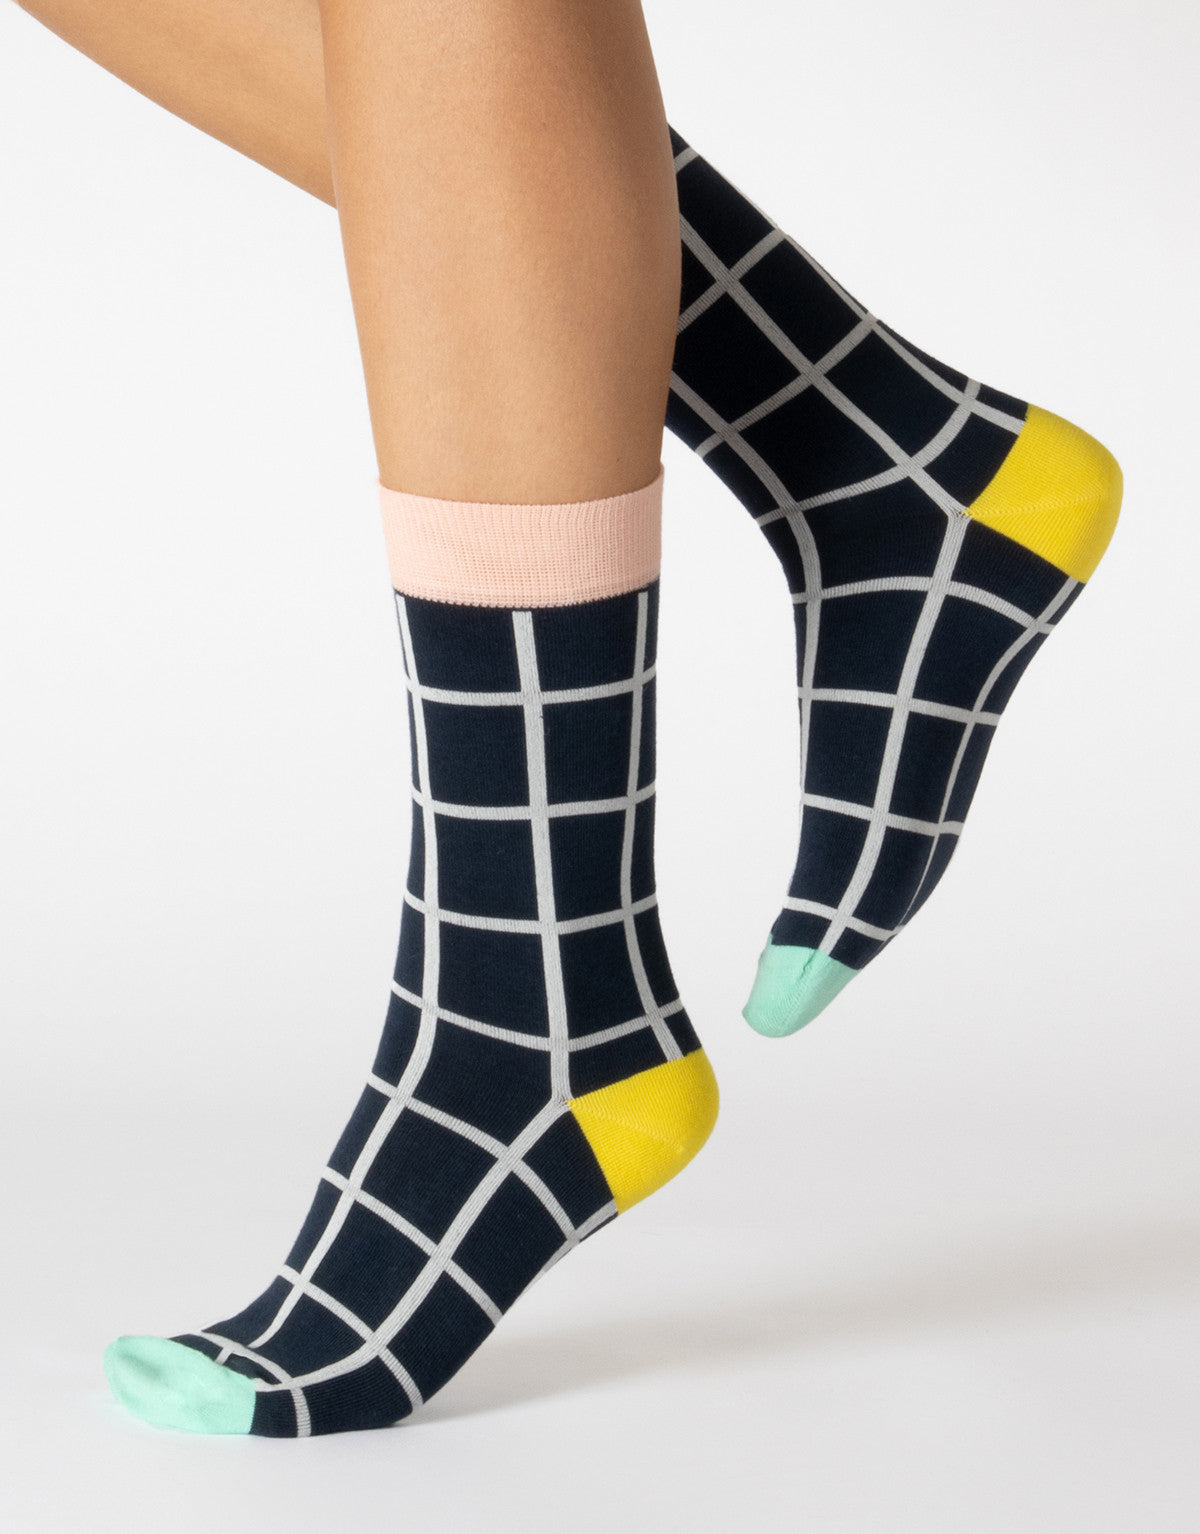 Calzitaly Checkered Cotton Socks - Navy ankle length cotton ankle socks with a grey linear square pattern, dusty pink cuff, yellow shaped heal and mint green toe with flat seams.